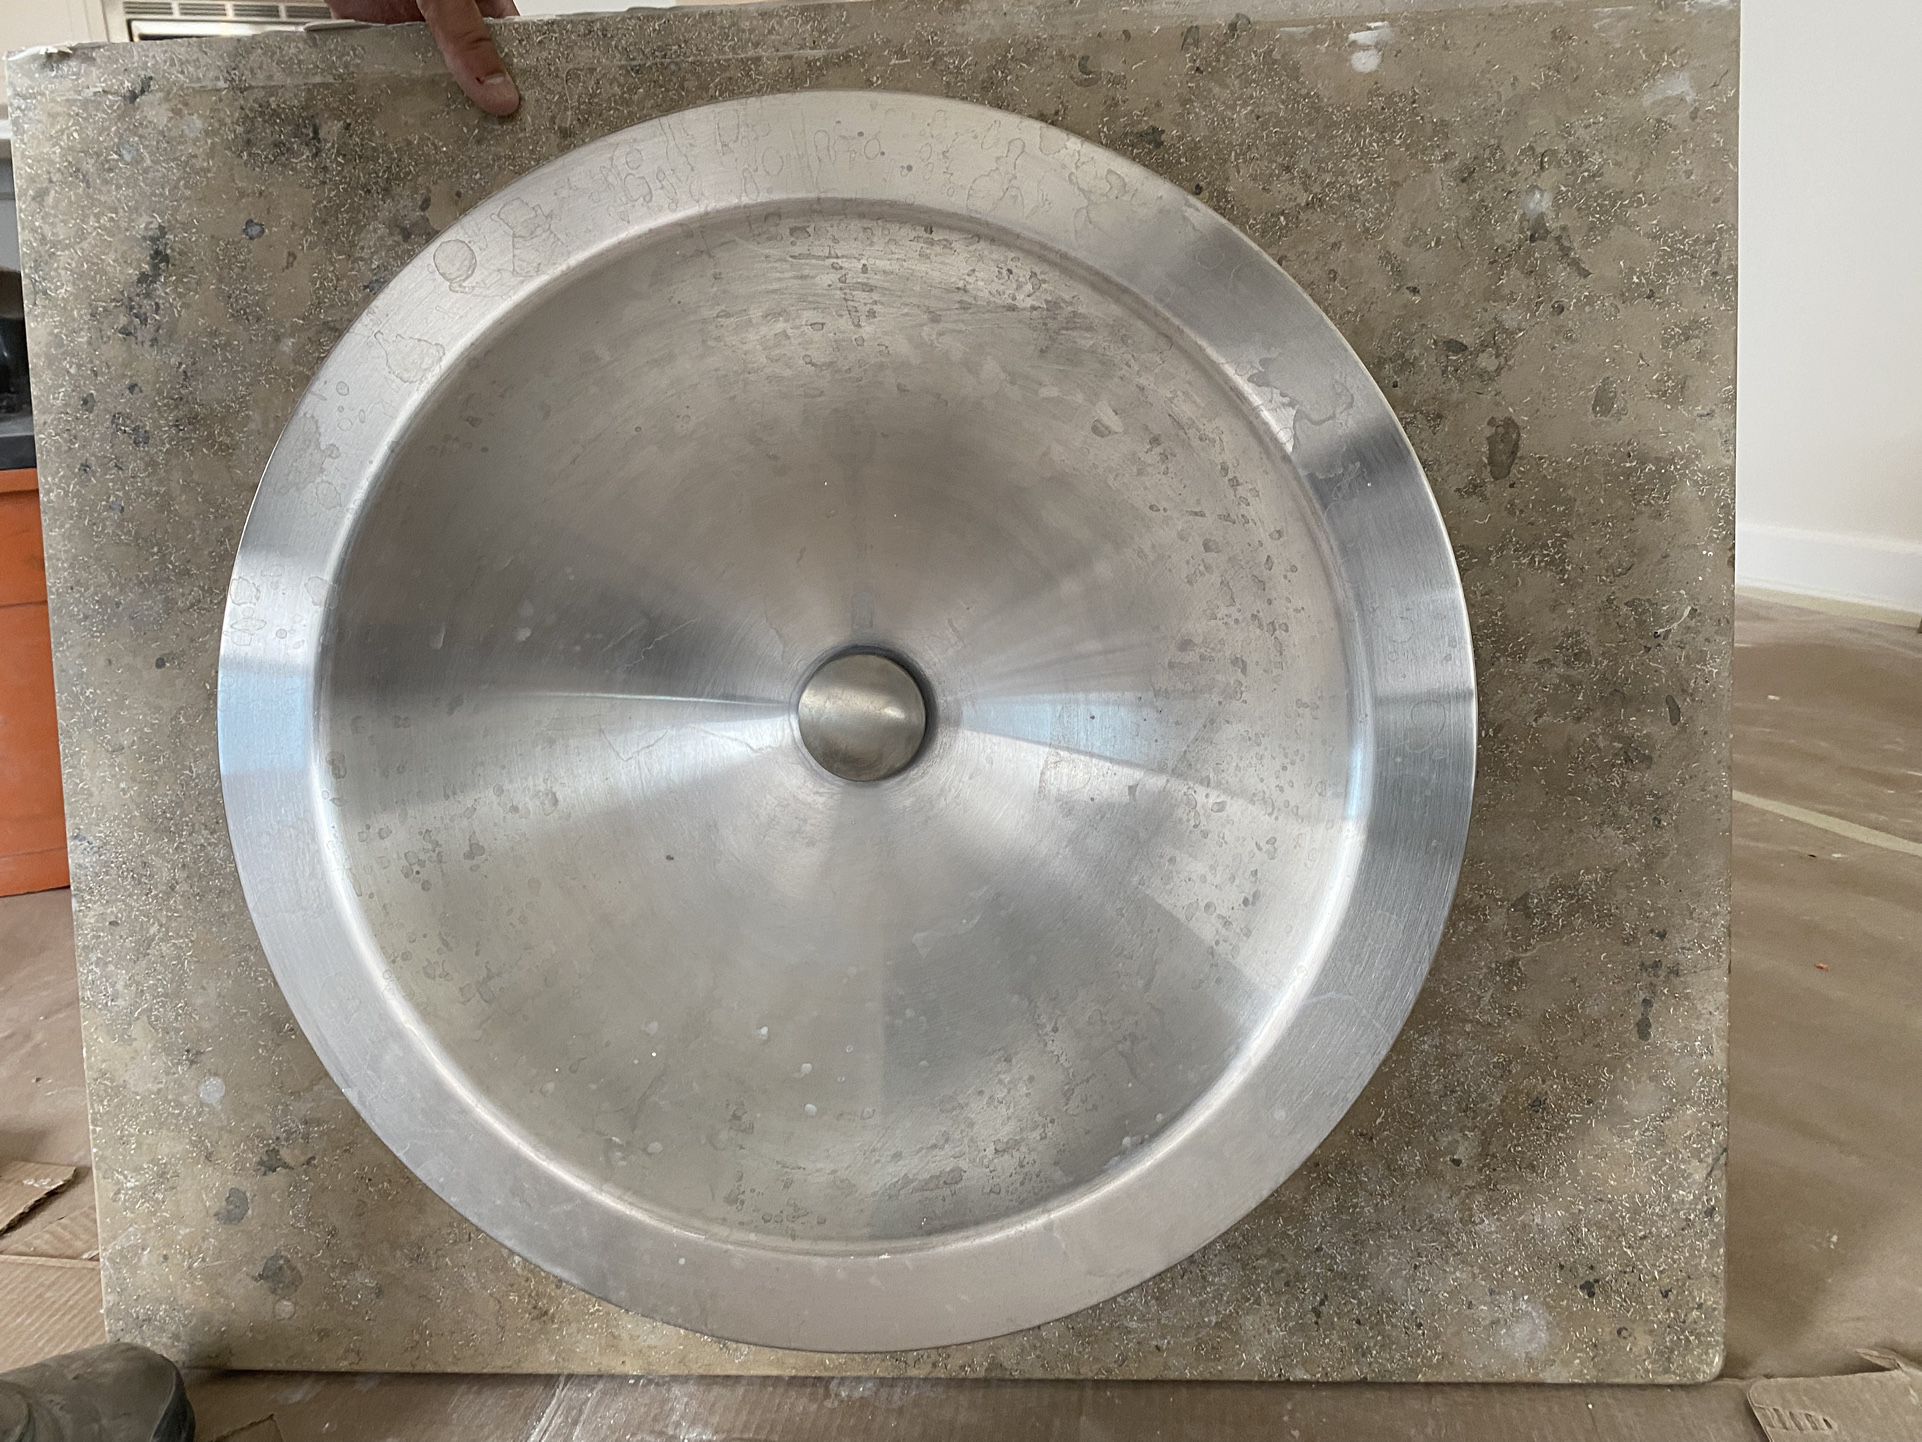 Kohler Bowl Stainless Steel With a Countertop 